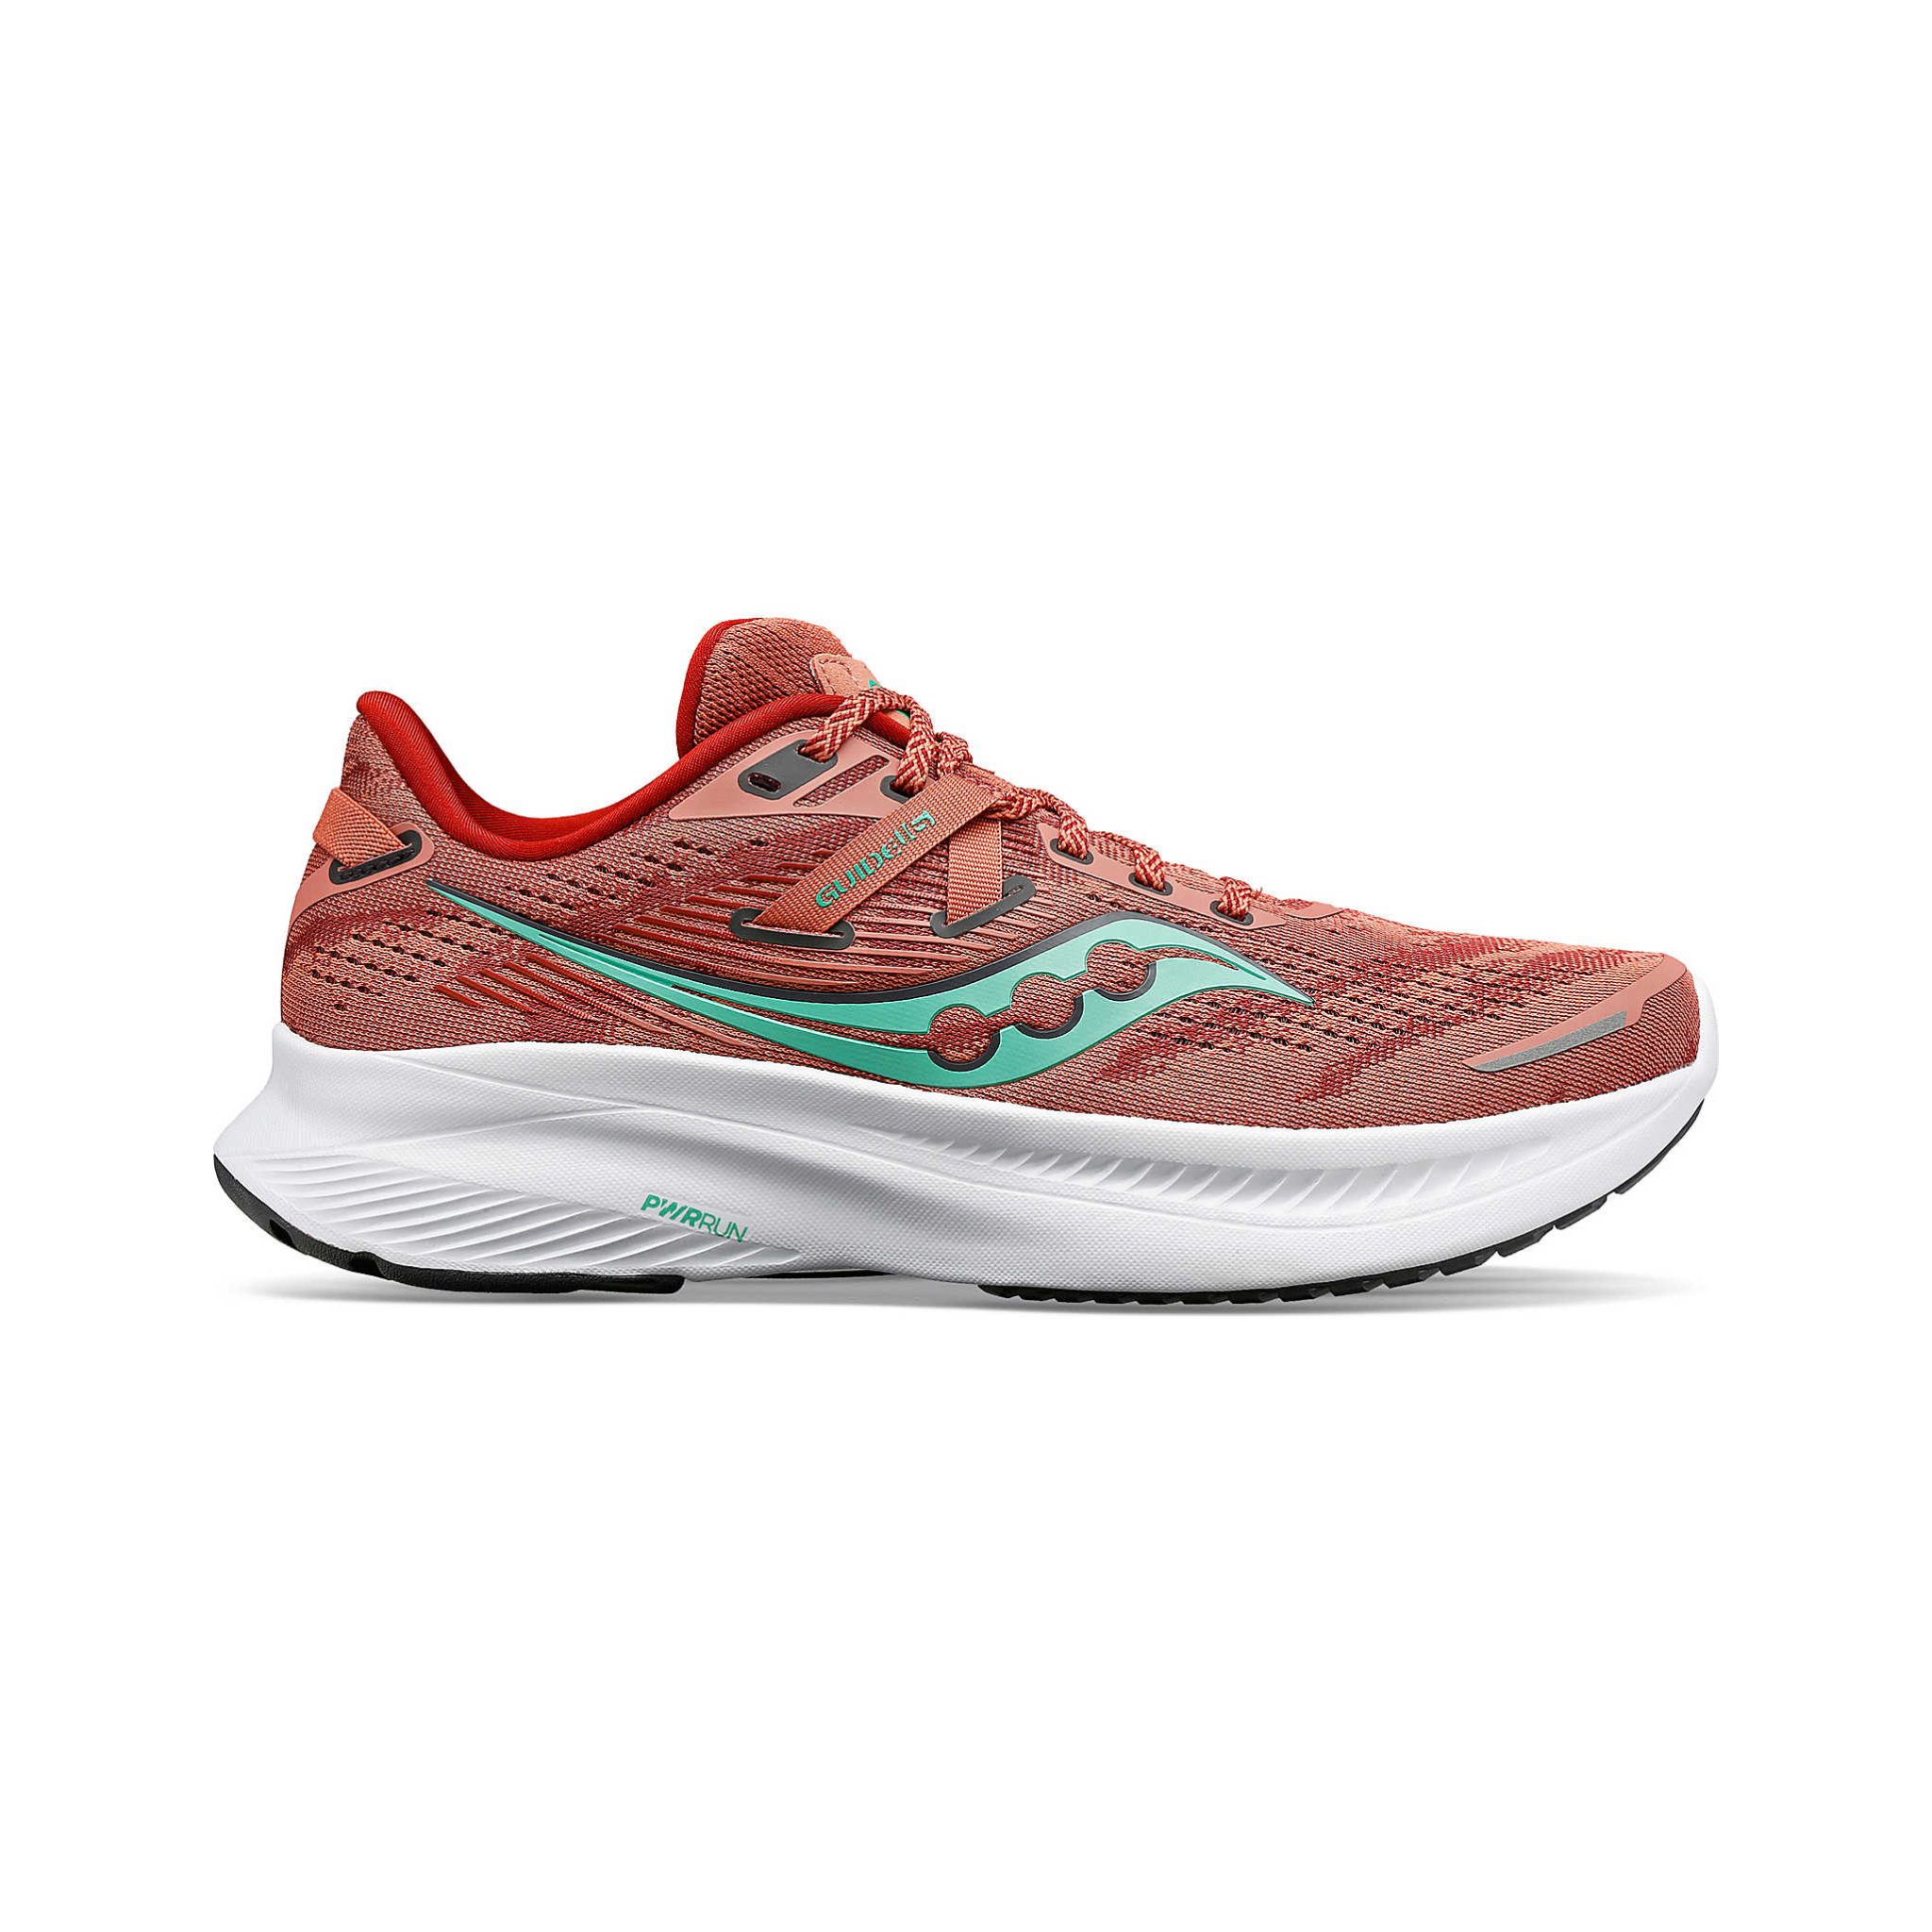 SAUCONY WOMEN'S GUIDE 16 - WIDE D - 25 SOOT/SPRING 5.0